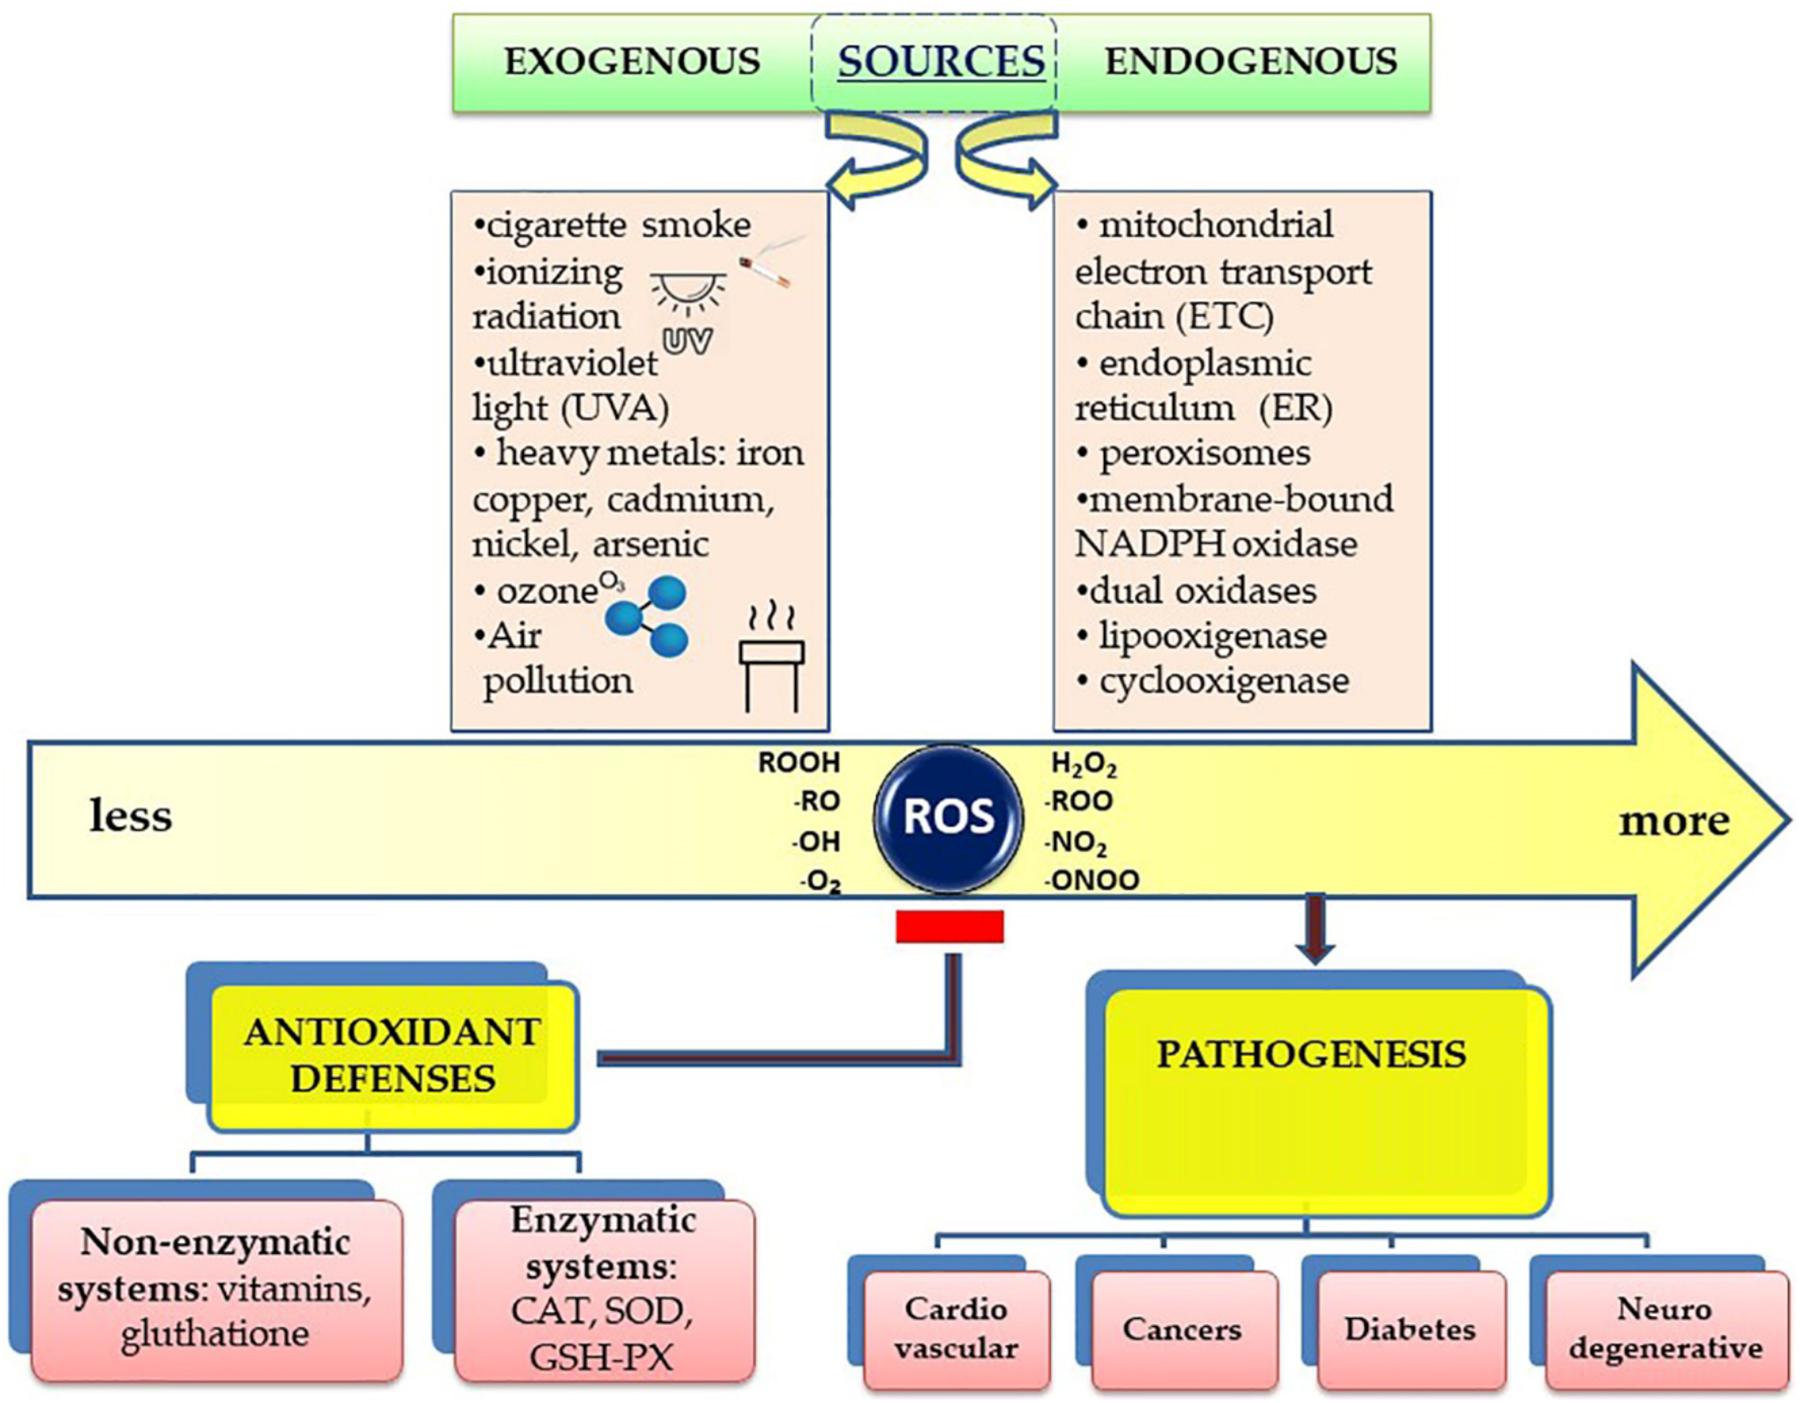 Free radicals and oxidative damage to carbohydrates